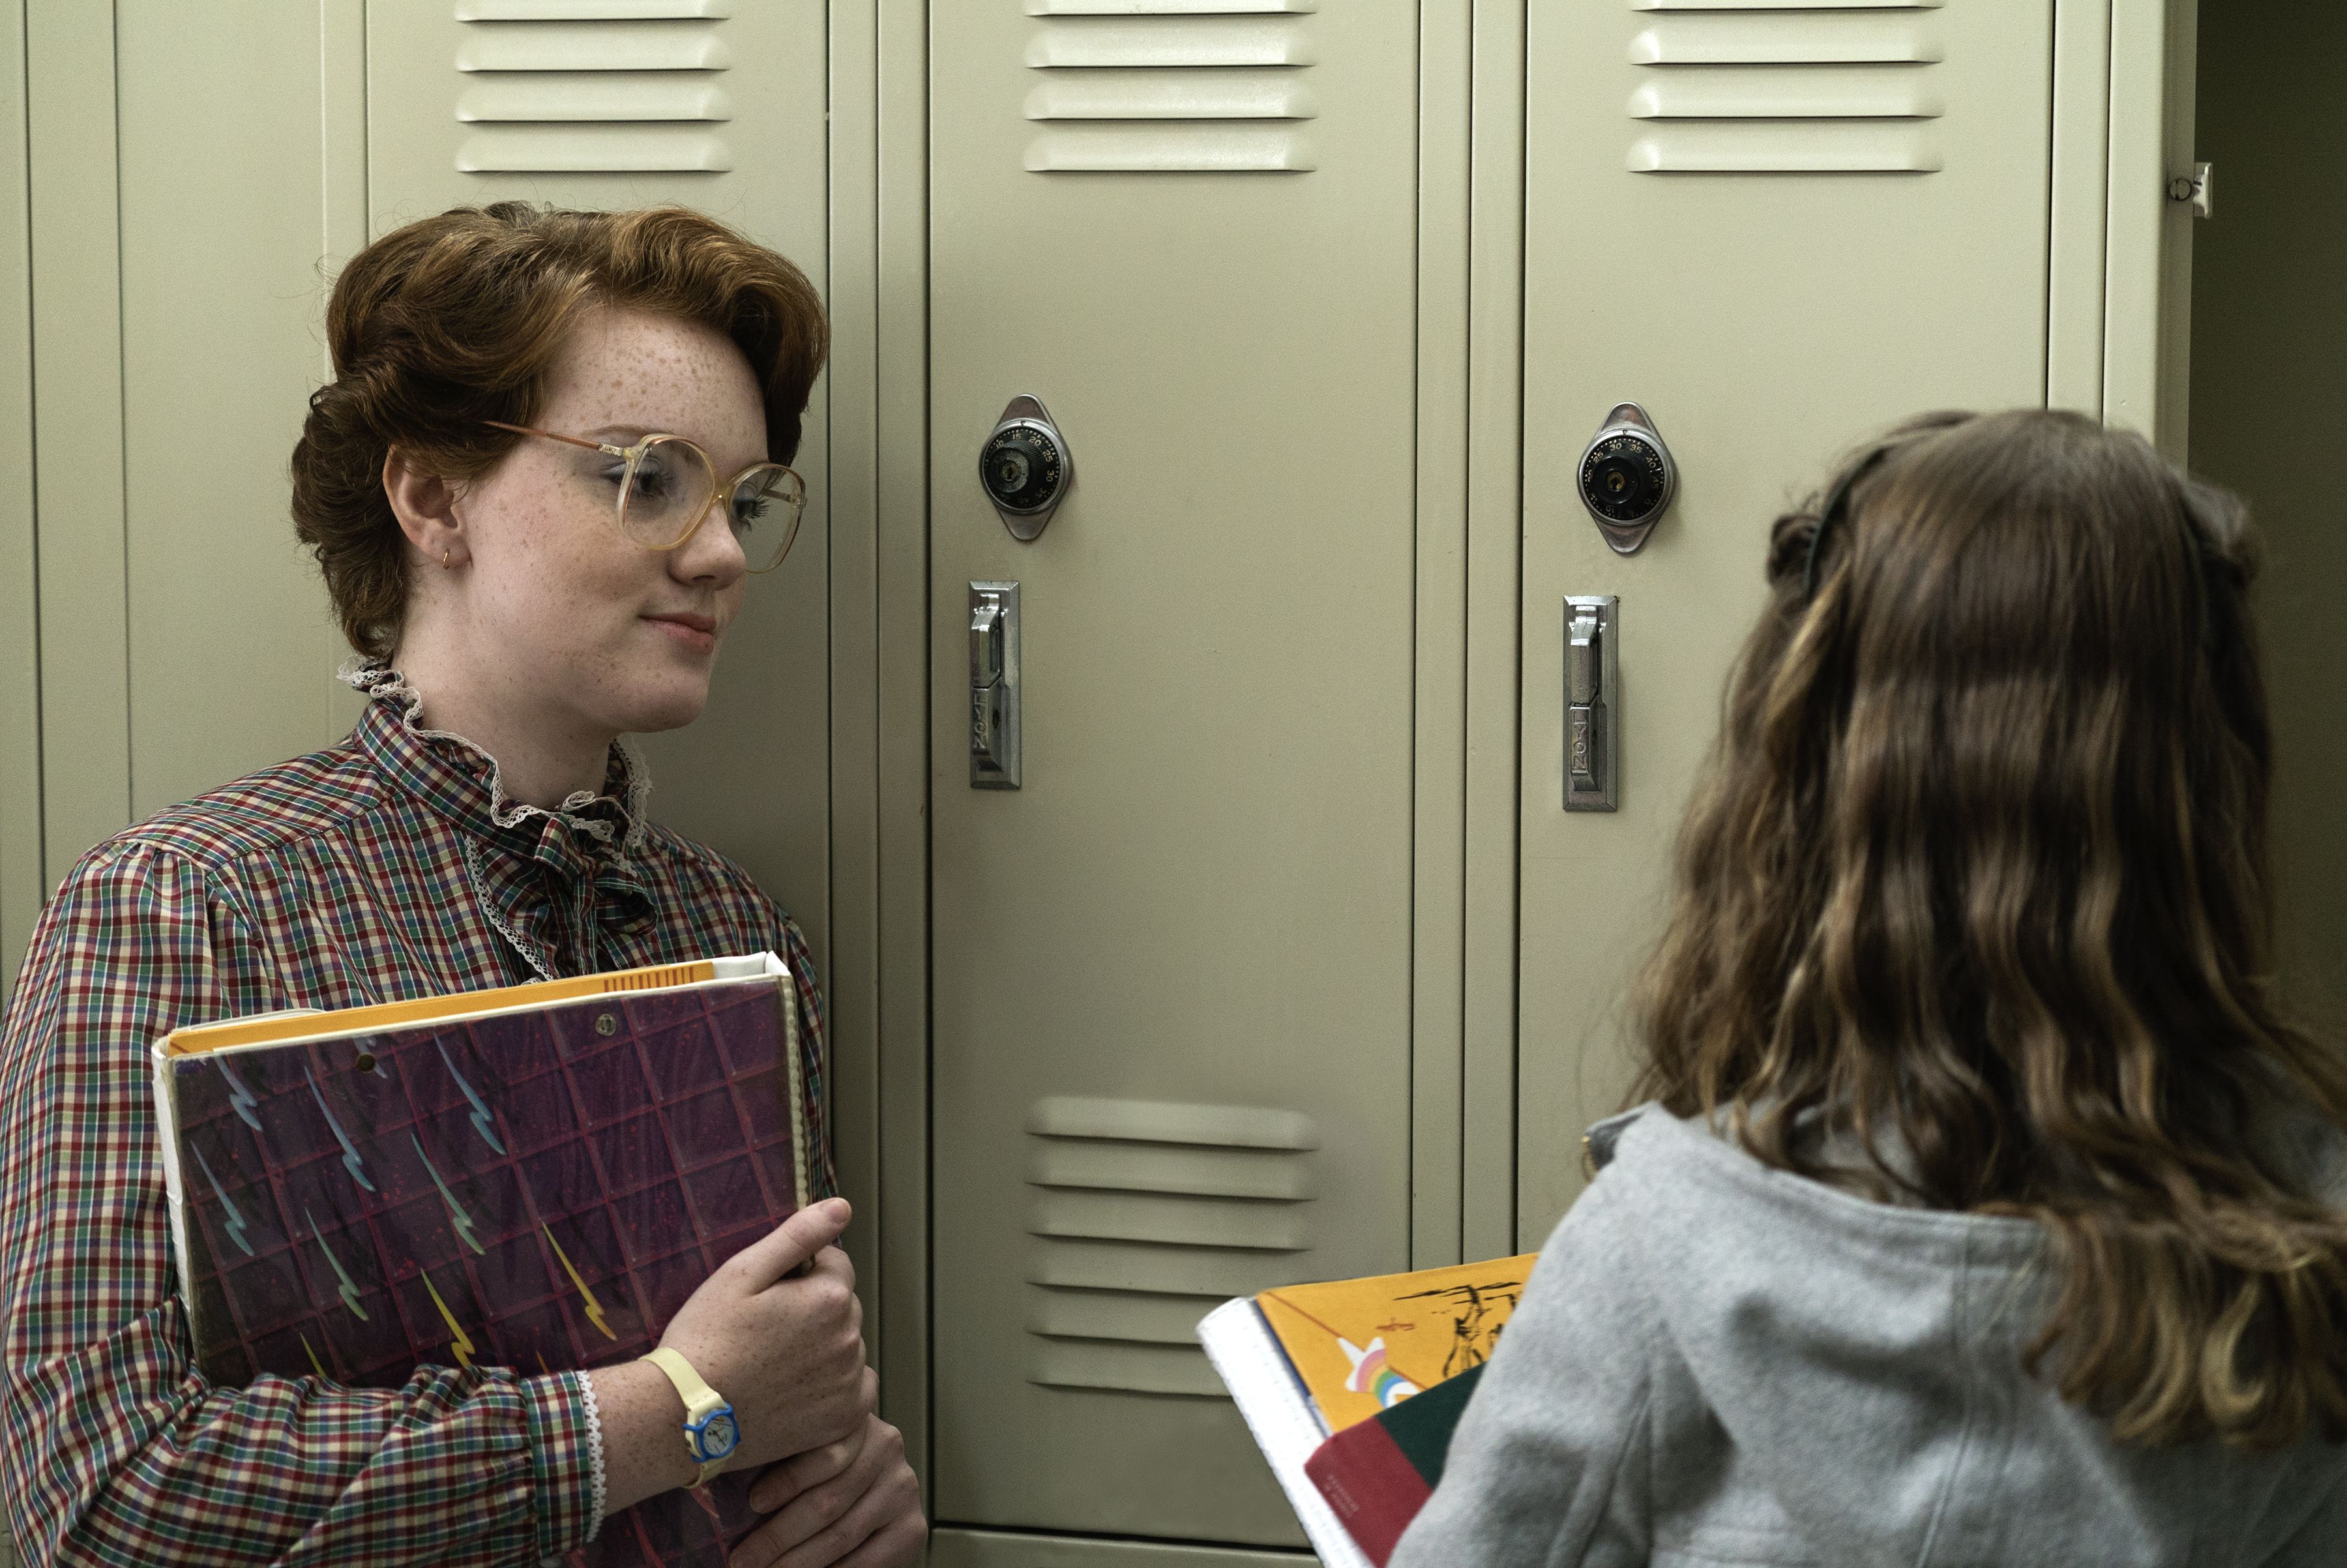 Shannon Purser as Barb in Stranger Things